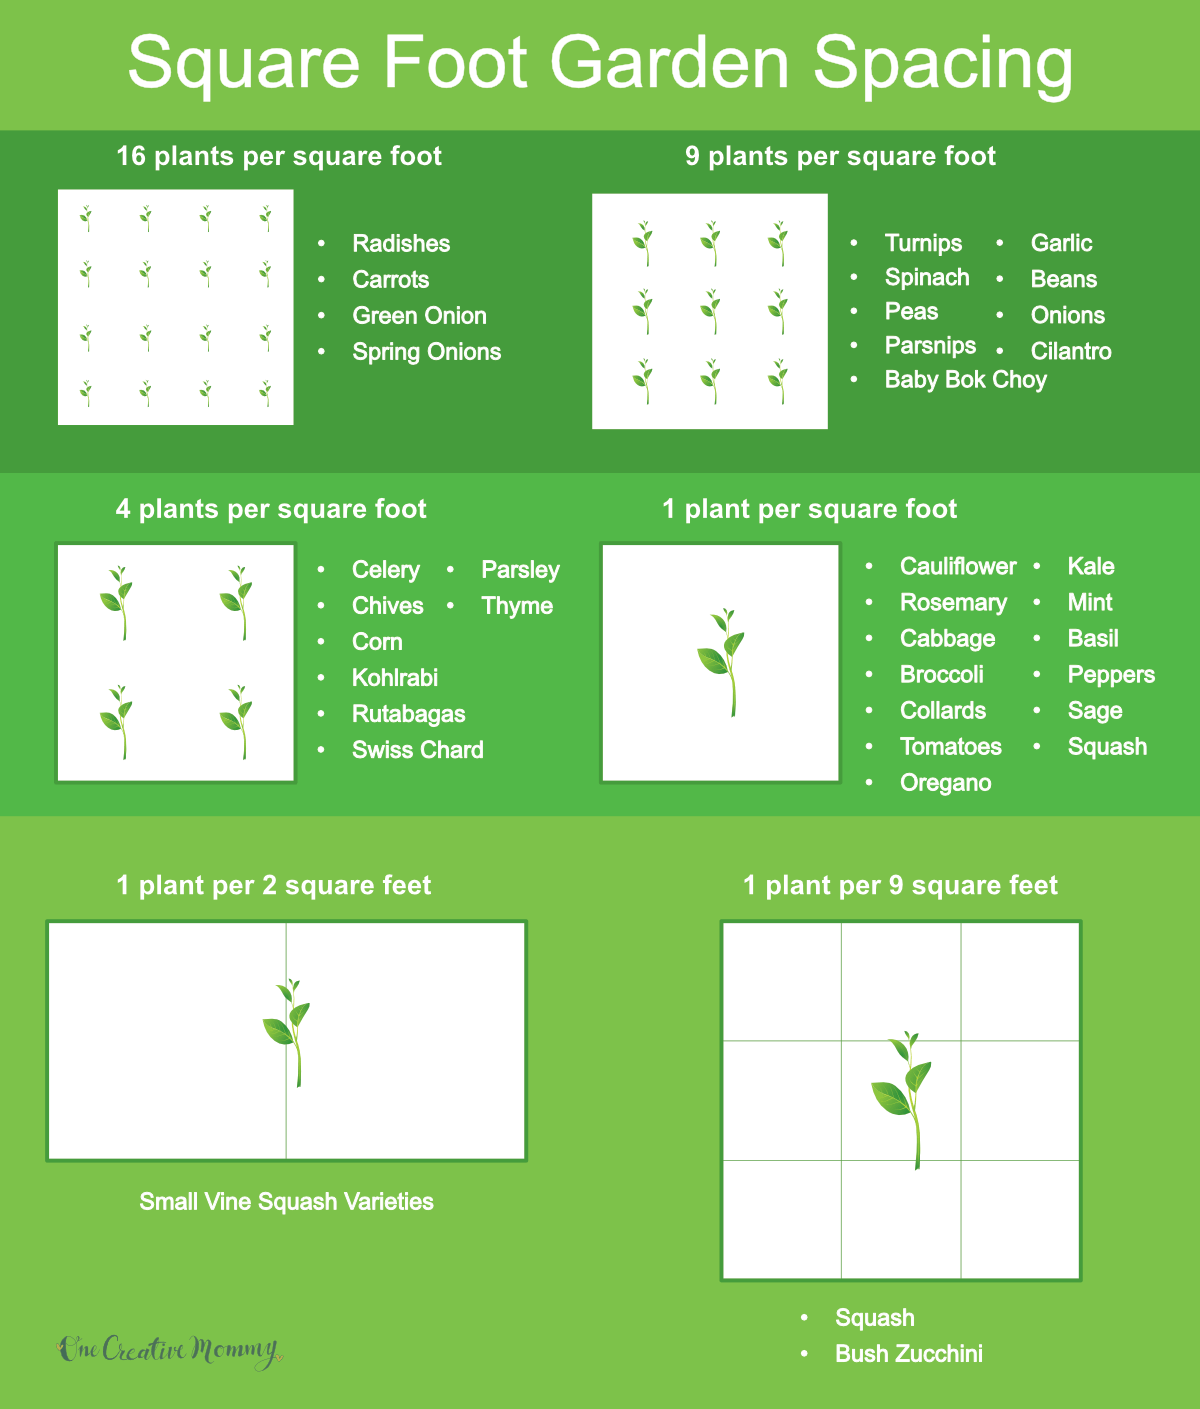 Chart showing plant spacing for square foot garden beds.